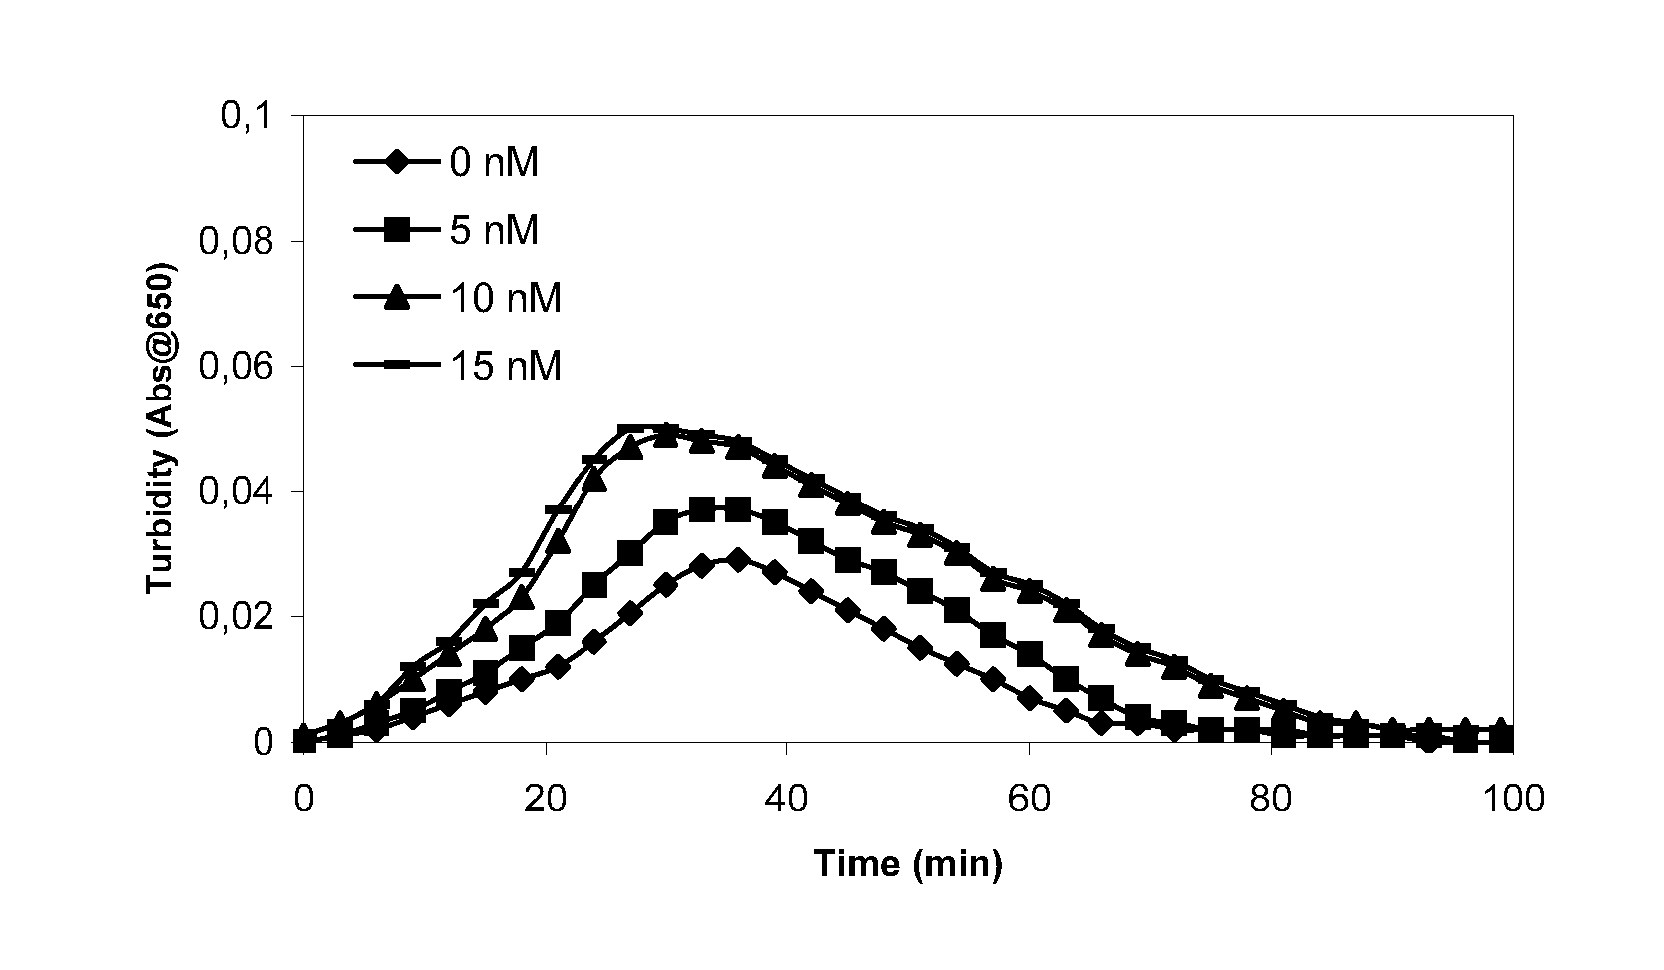 Pharmaceutical Compositions Comprising Factor VII Polypeptides and Factor XI Polypeptides